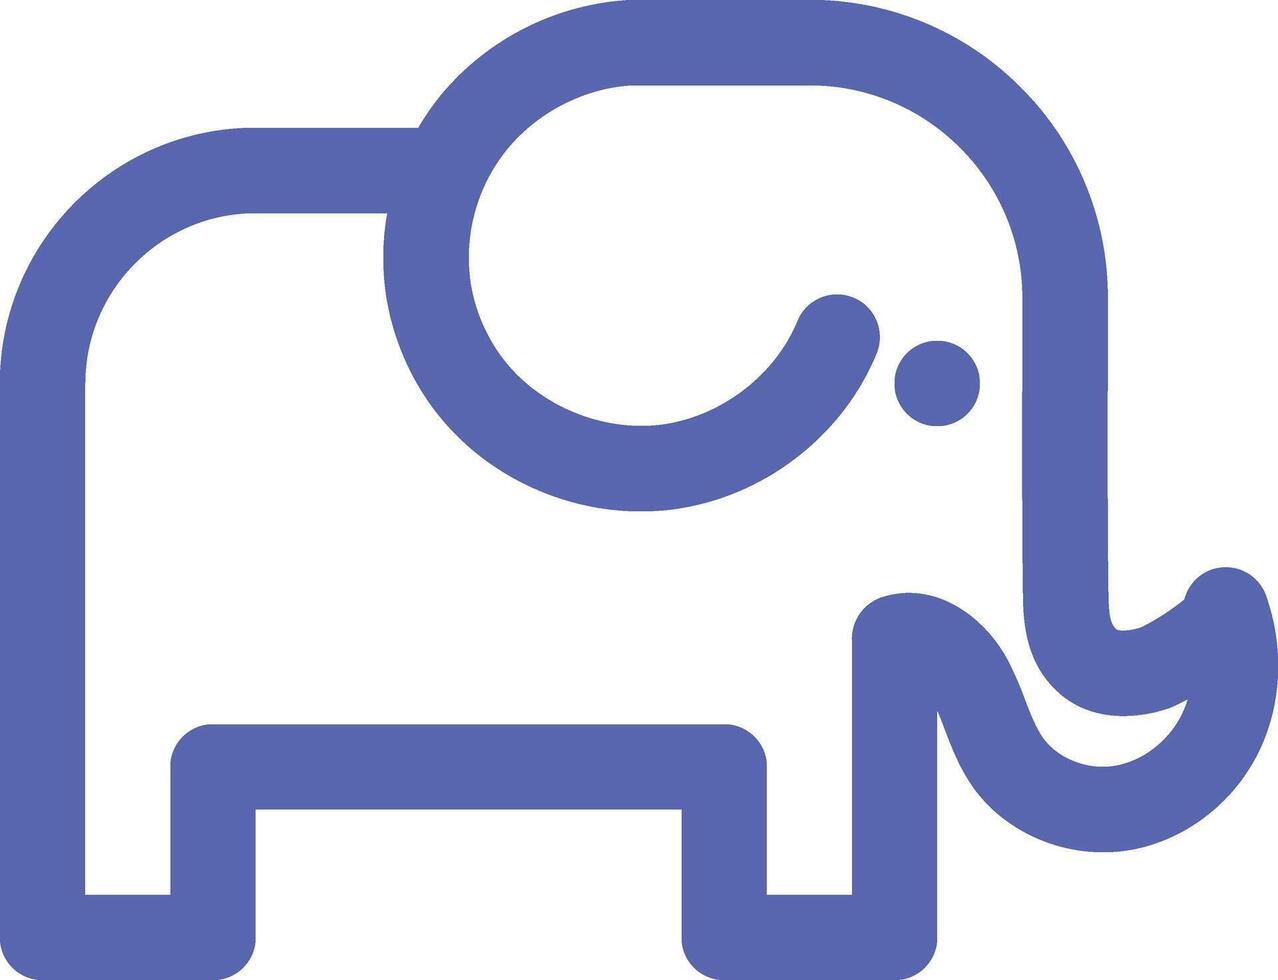 a blue elephant icon on a white background vector